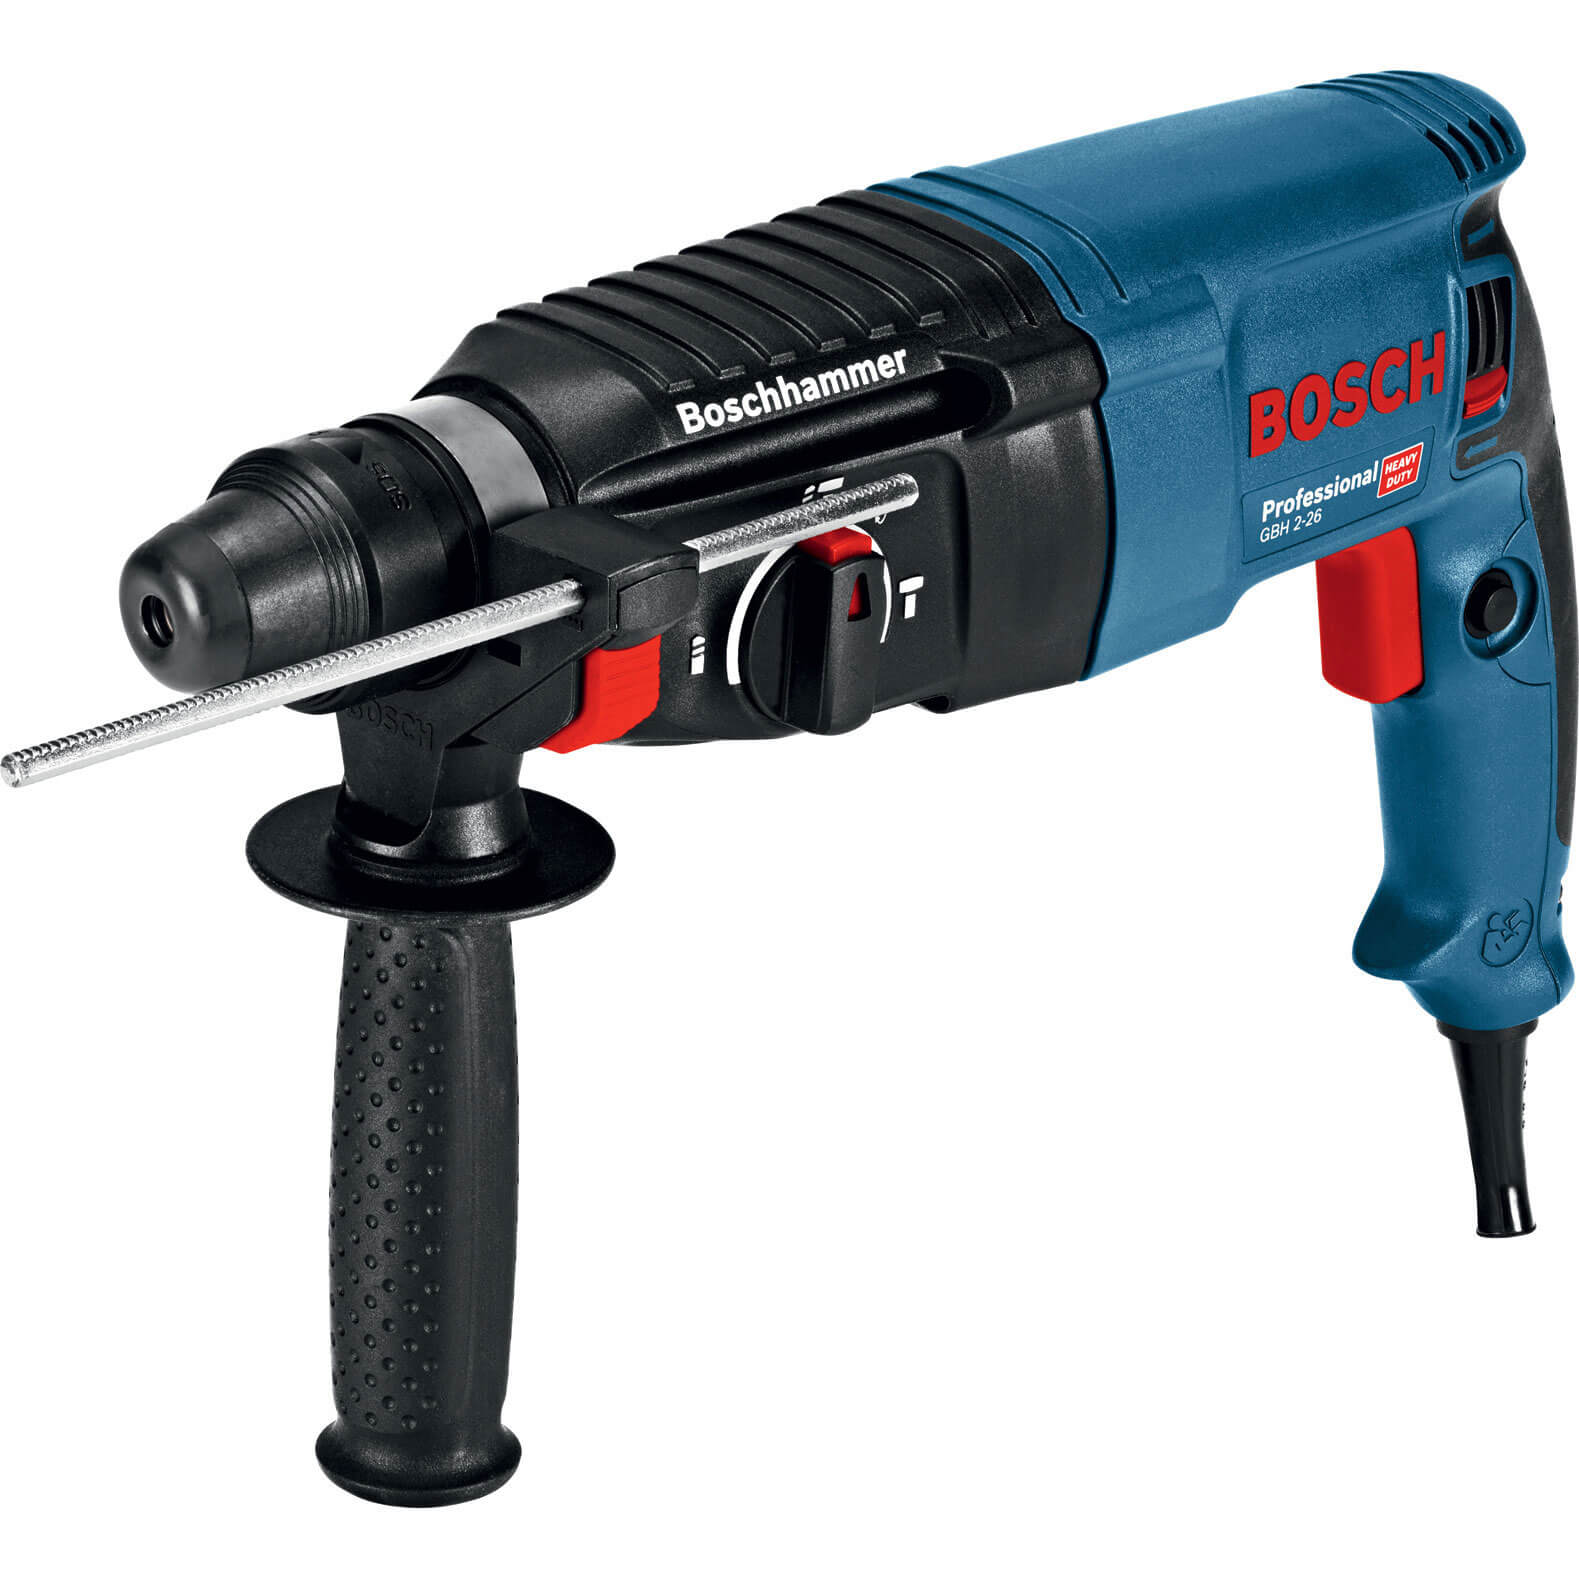 Image of Bosch GBH 2 26 SDS Plus 3 Mode Rotary Hammer Drill 240v